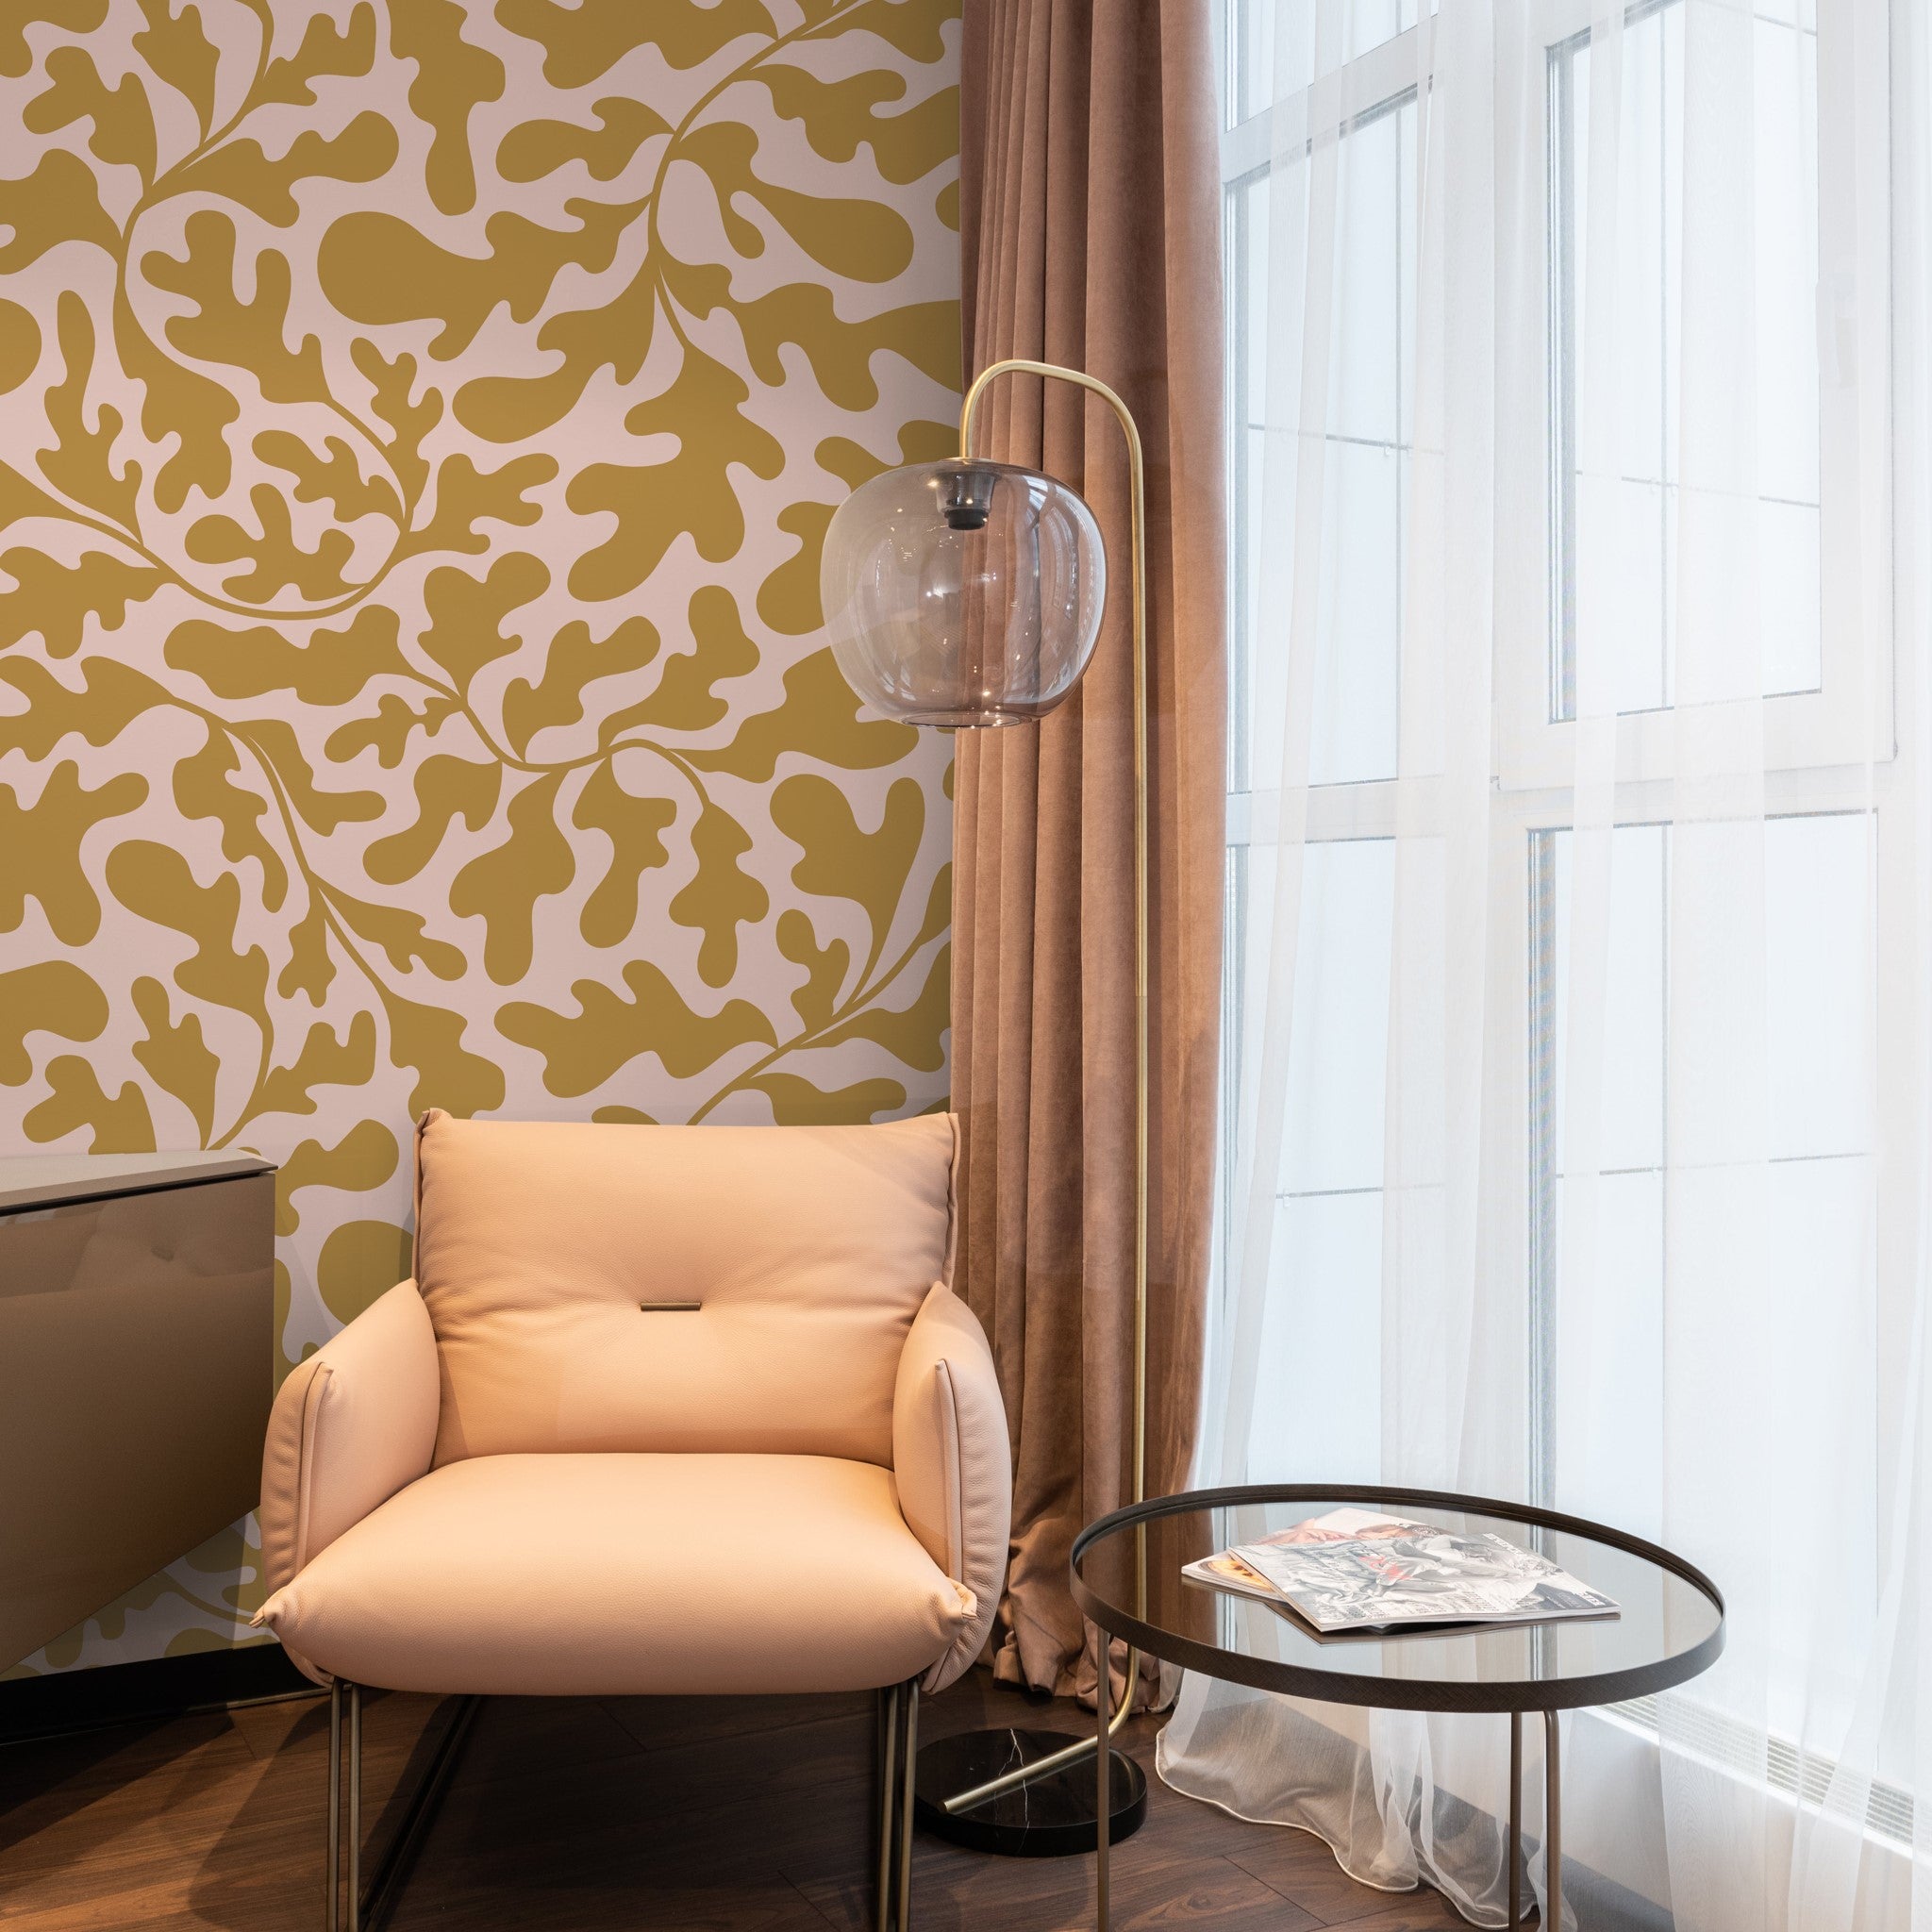 "Tawnie Wallpaper by Wall Blush featuring in a modern living room setting, accentuating the stylish decor."